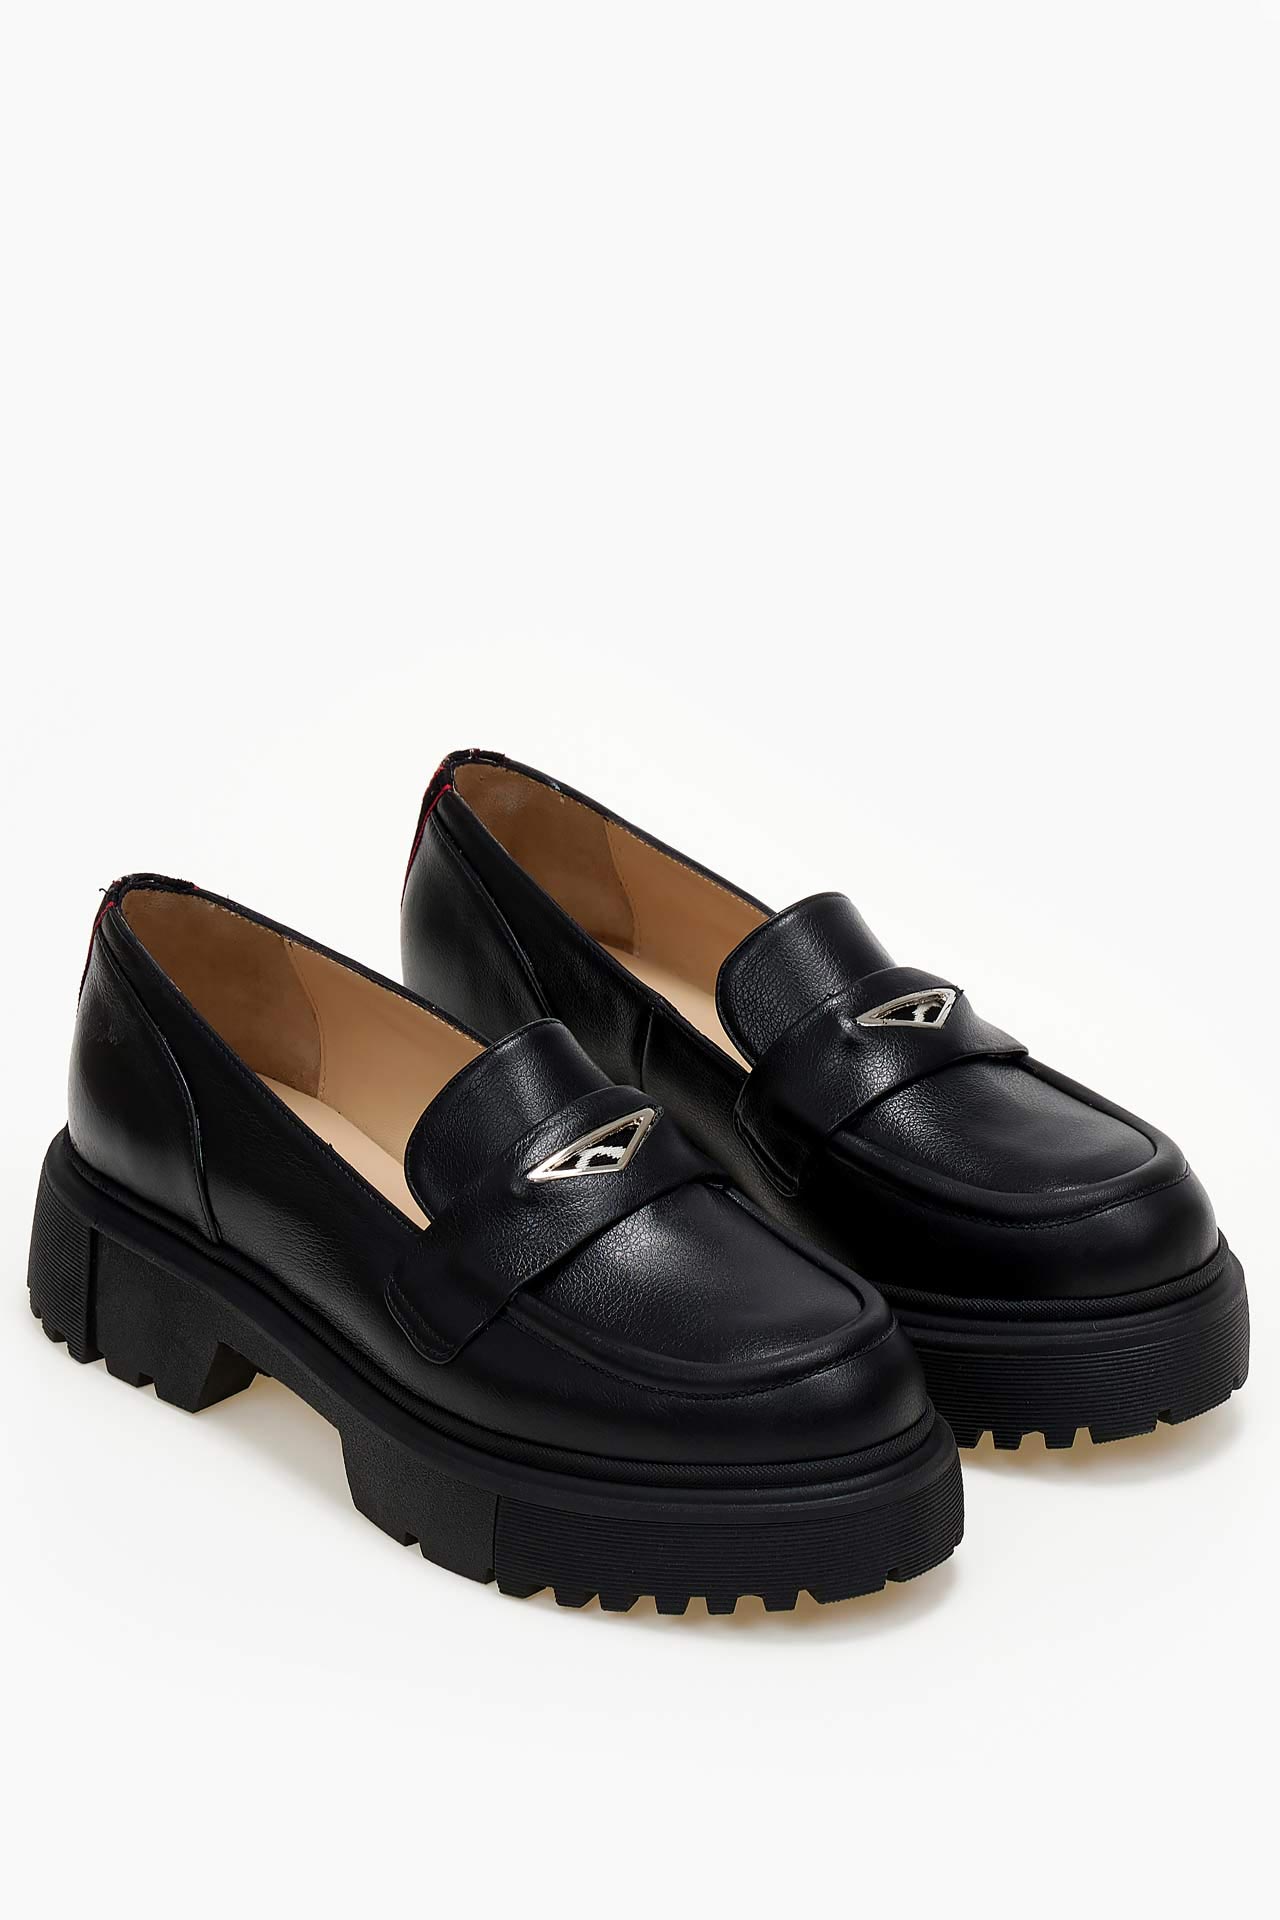 DORE BLACK LEATHER LOAFERS